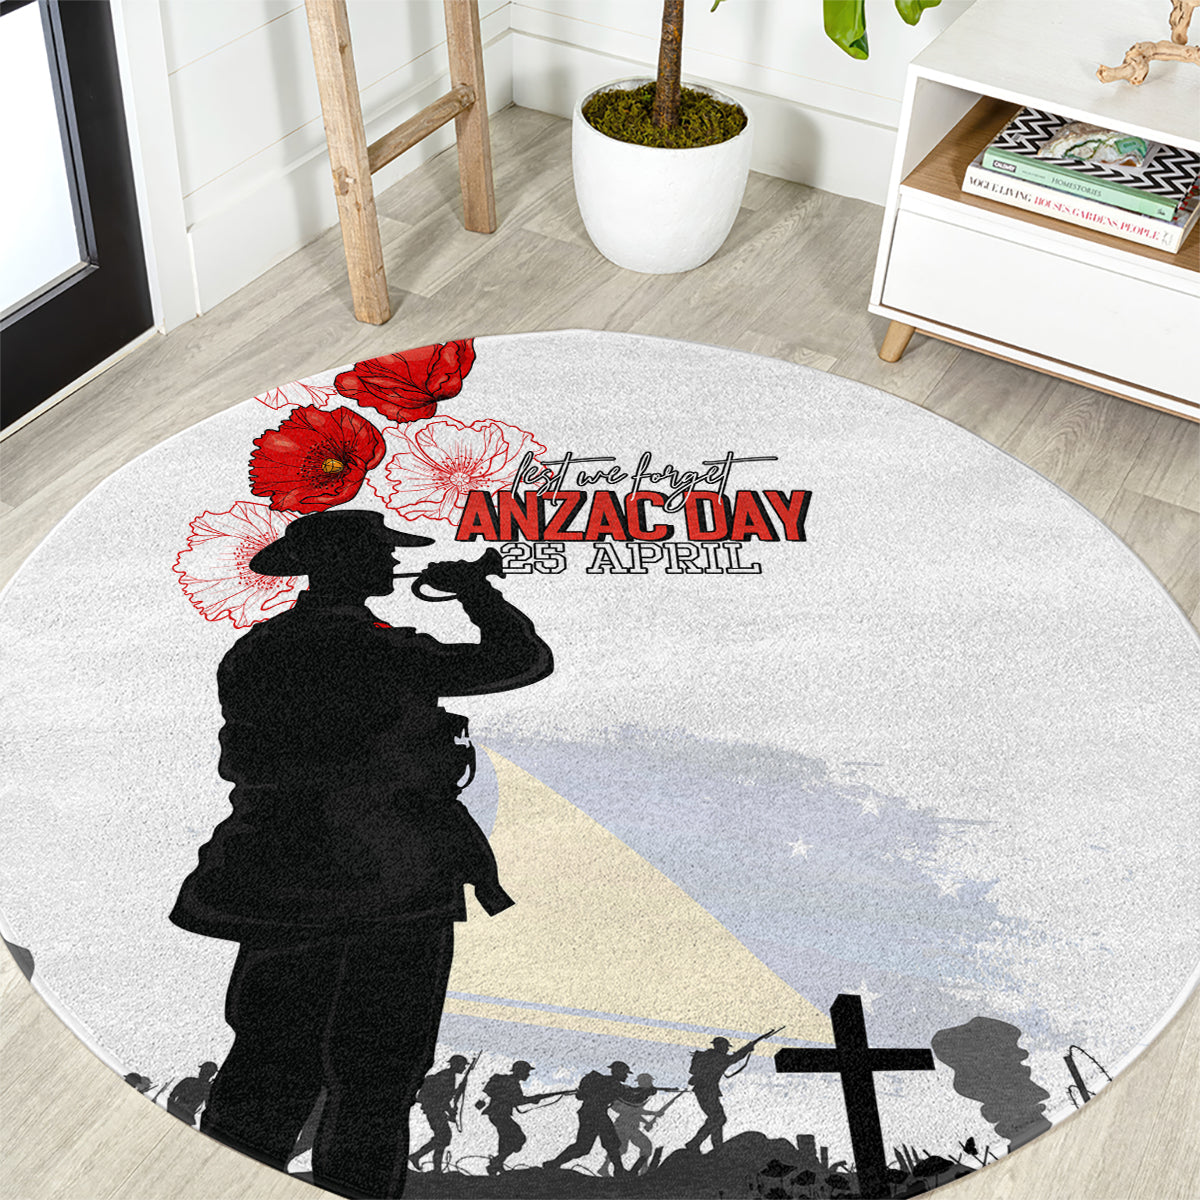 Tokelau ANZAC Day Round Carpet Lest We Forget Red Poppy Flowers and Soldier LT03 White - Polynesian Pride